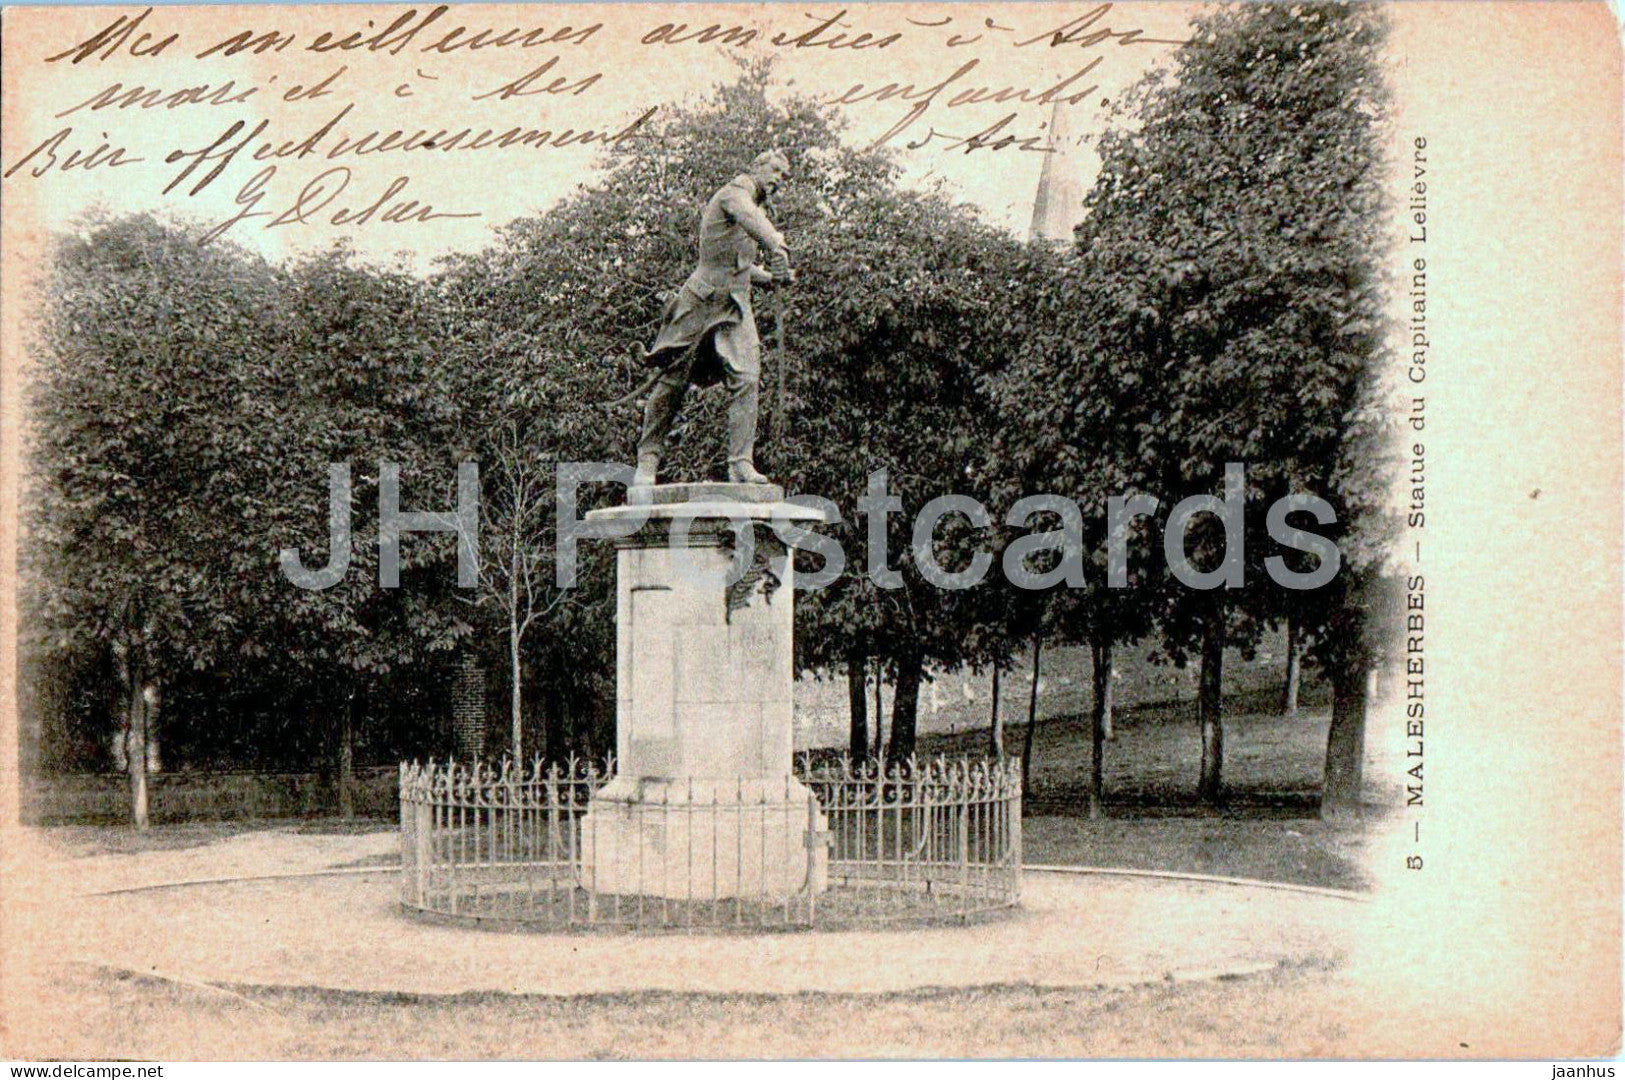 Malesherbes - Statue du Capitaine Lelievre - monument - old postcard - France - used - JH Postcards